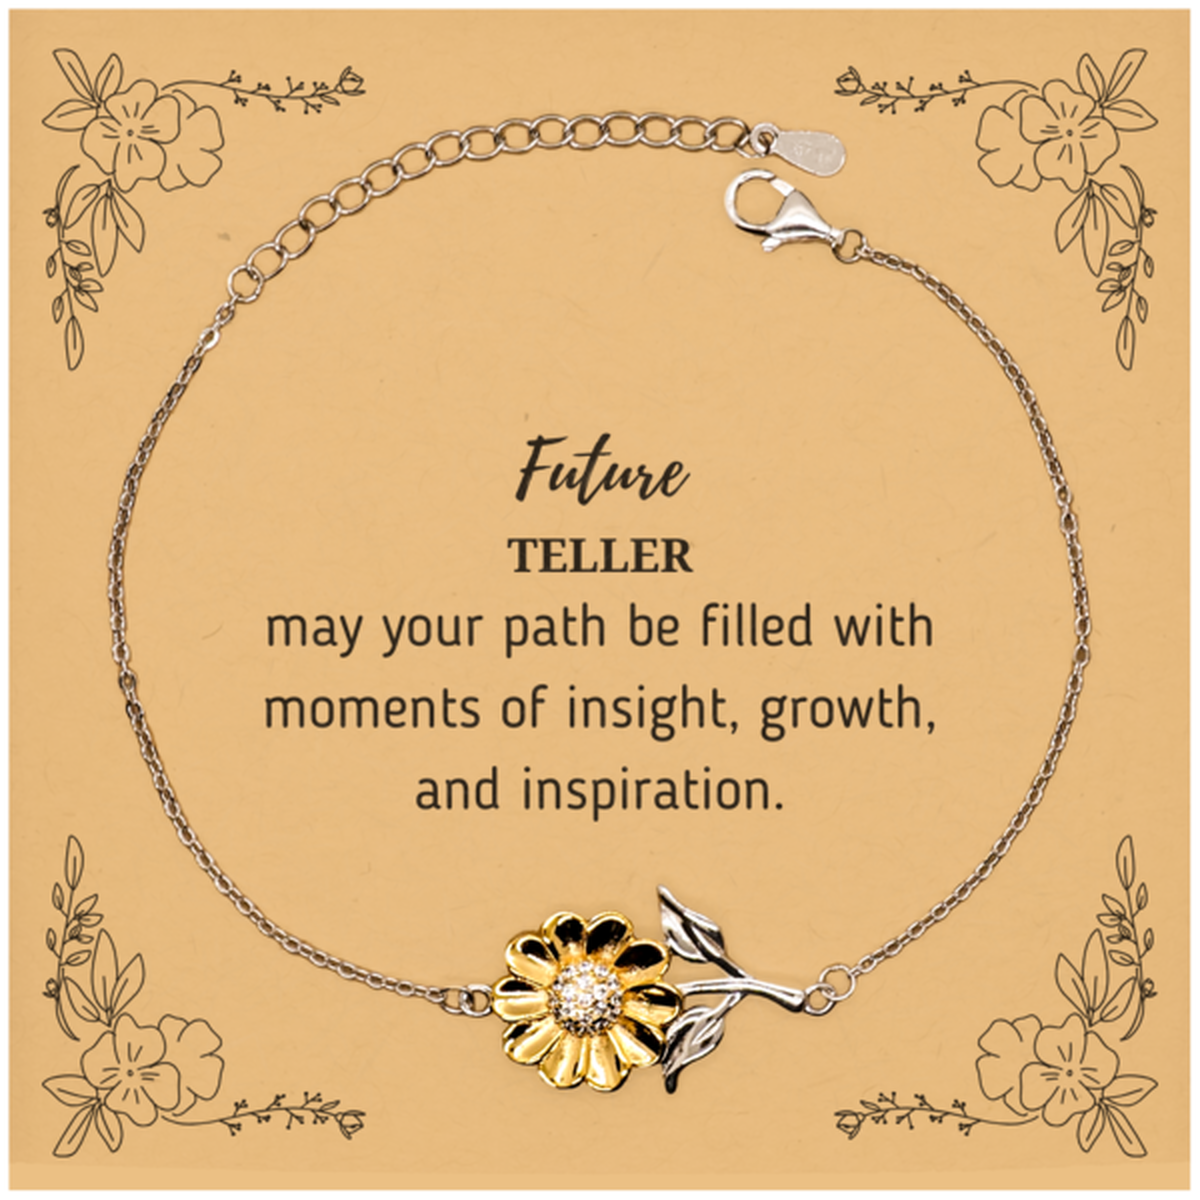 Future Teller Gifts, May your path be filled with moments of insight, Graduation Gifts for New Teller, Christmas Unique Sunflower Bracelet For Men, Women, Friends